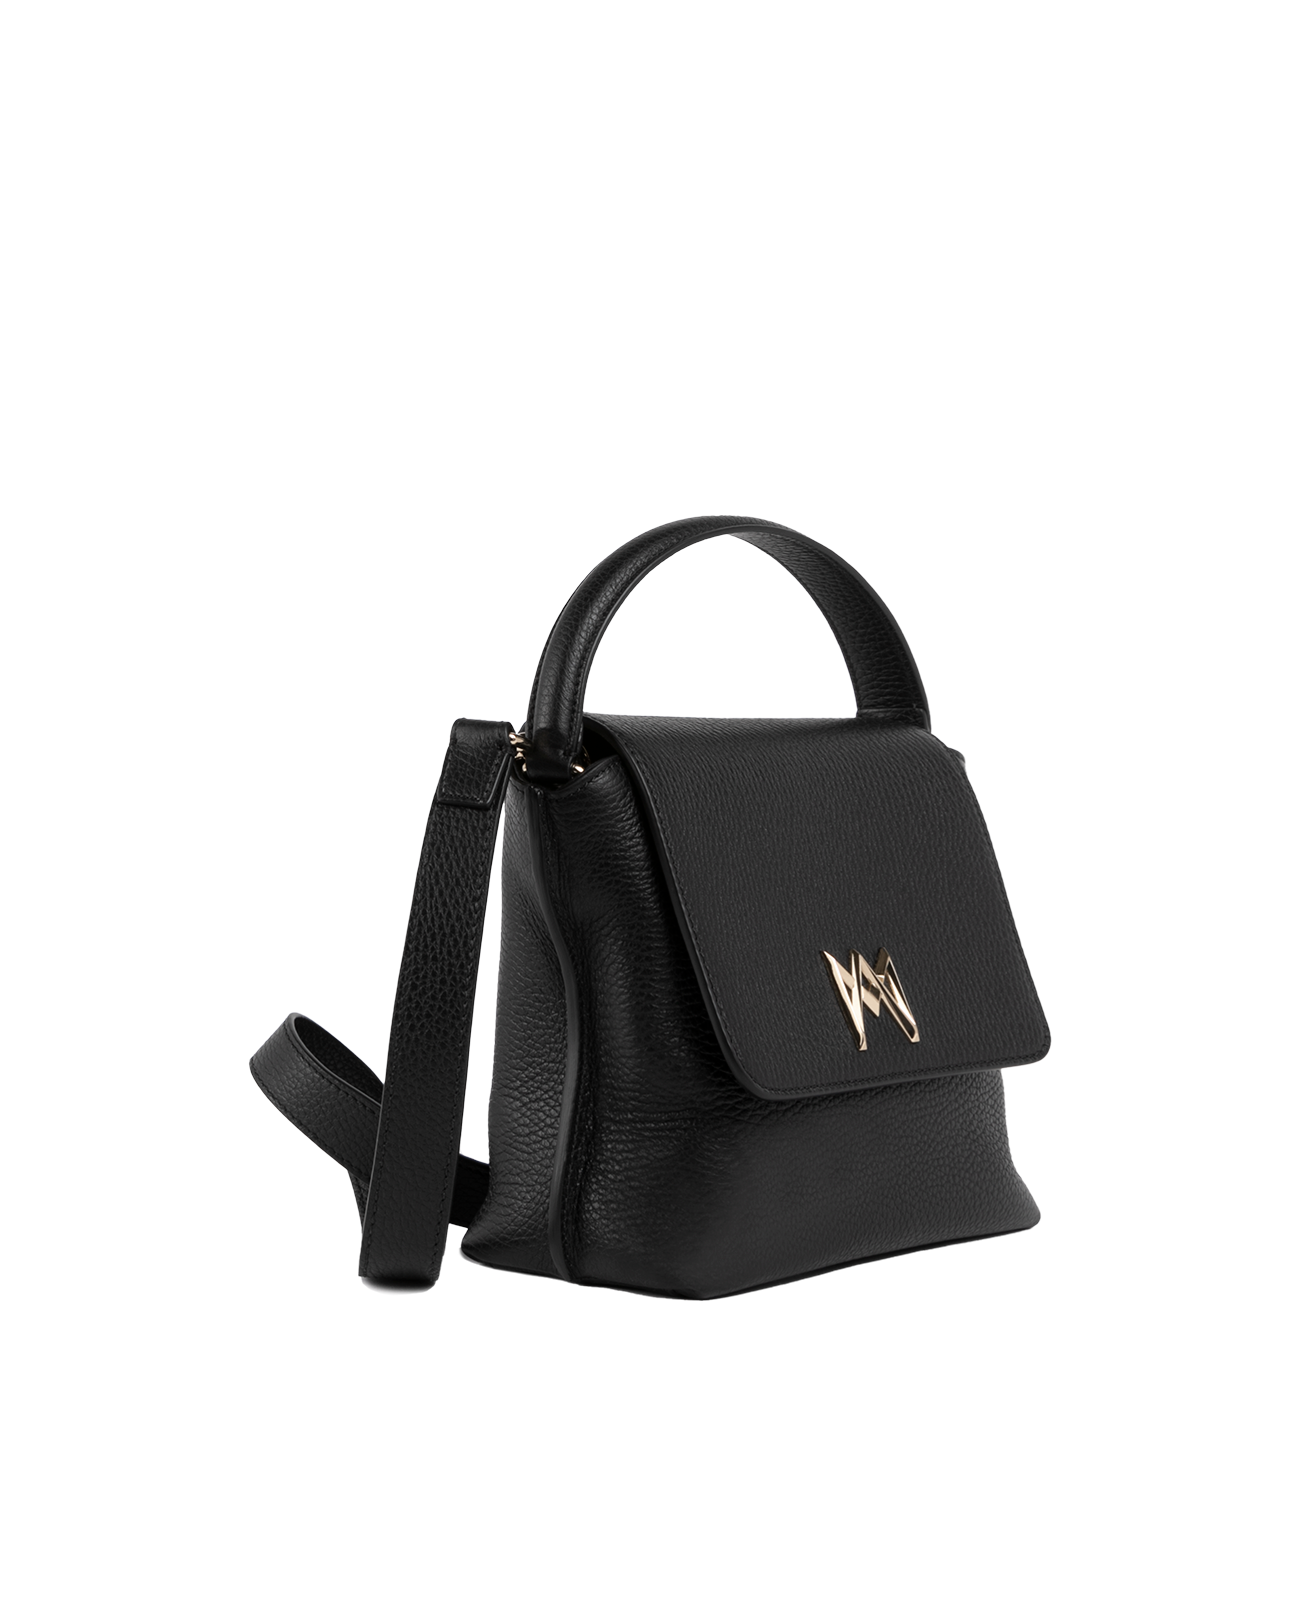 Cross-body bag in Italian full-grain leather, semi-aniline calf Italian leather with detachable shoulder strap.Three compartments, zip pocket in the back compartment. Magnetic flap closure with logo. Color: Black. Size:Medium